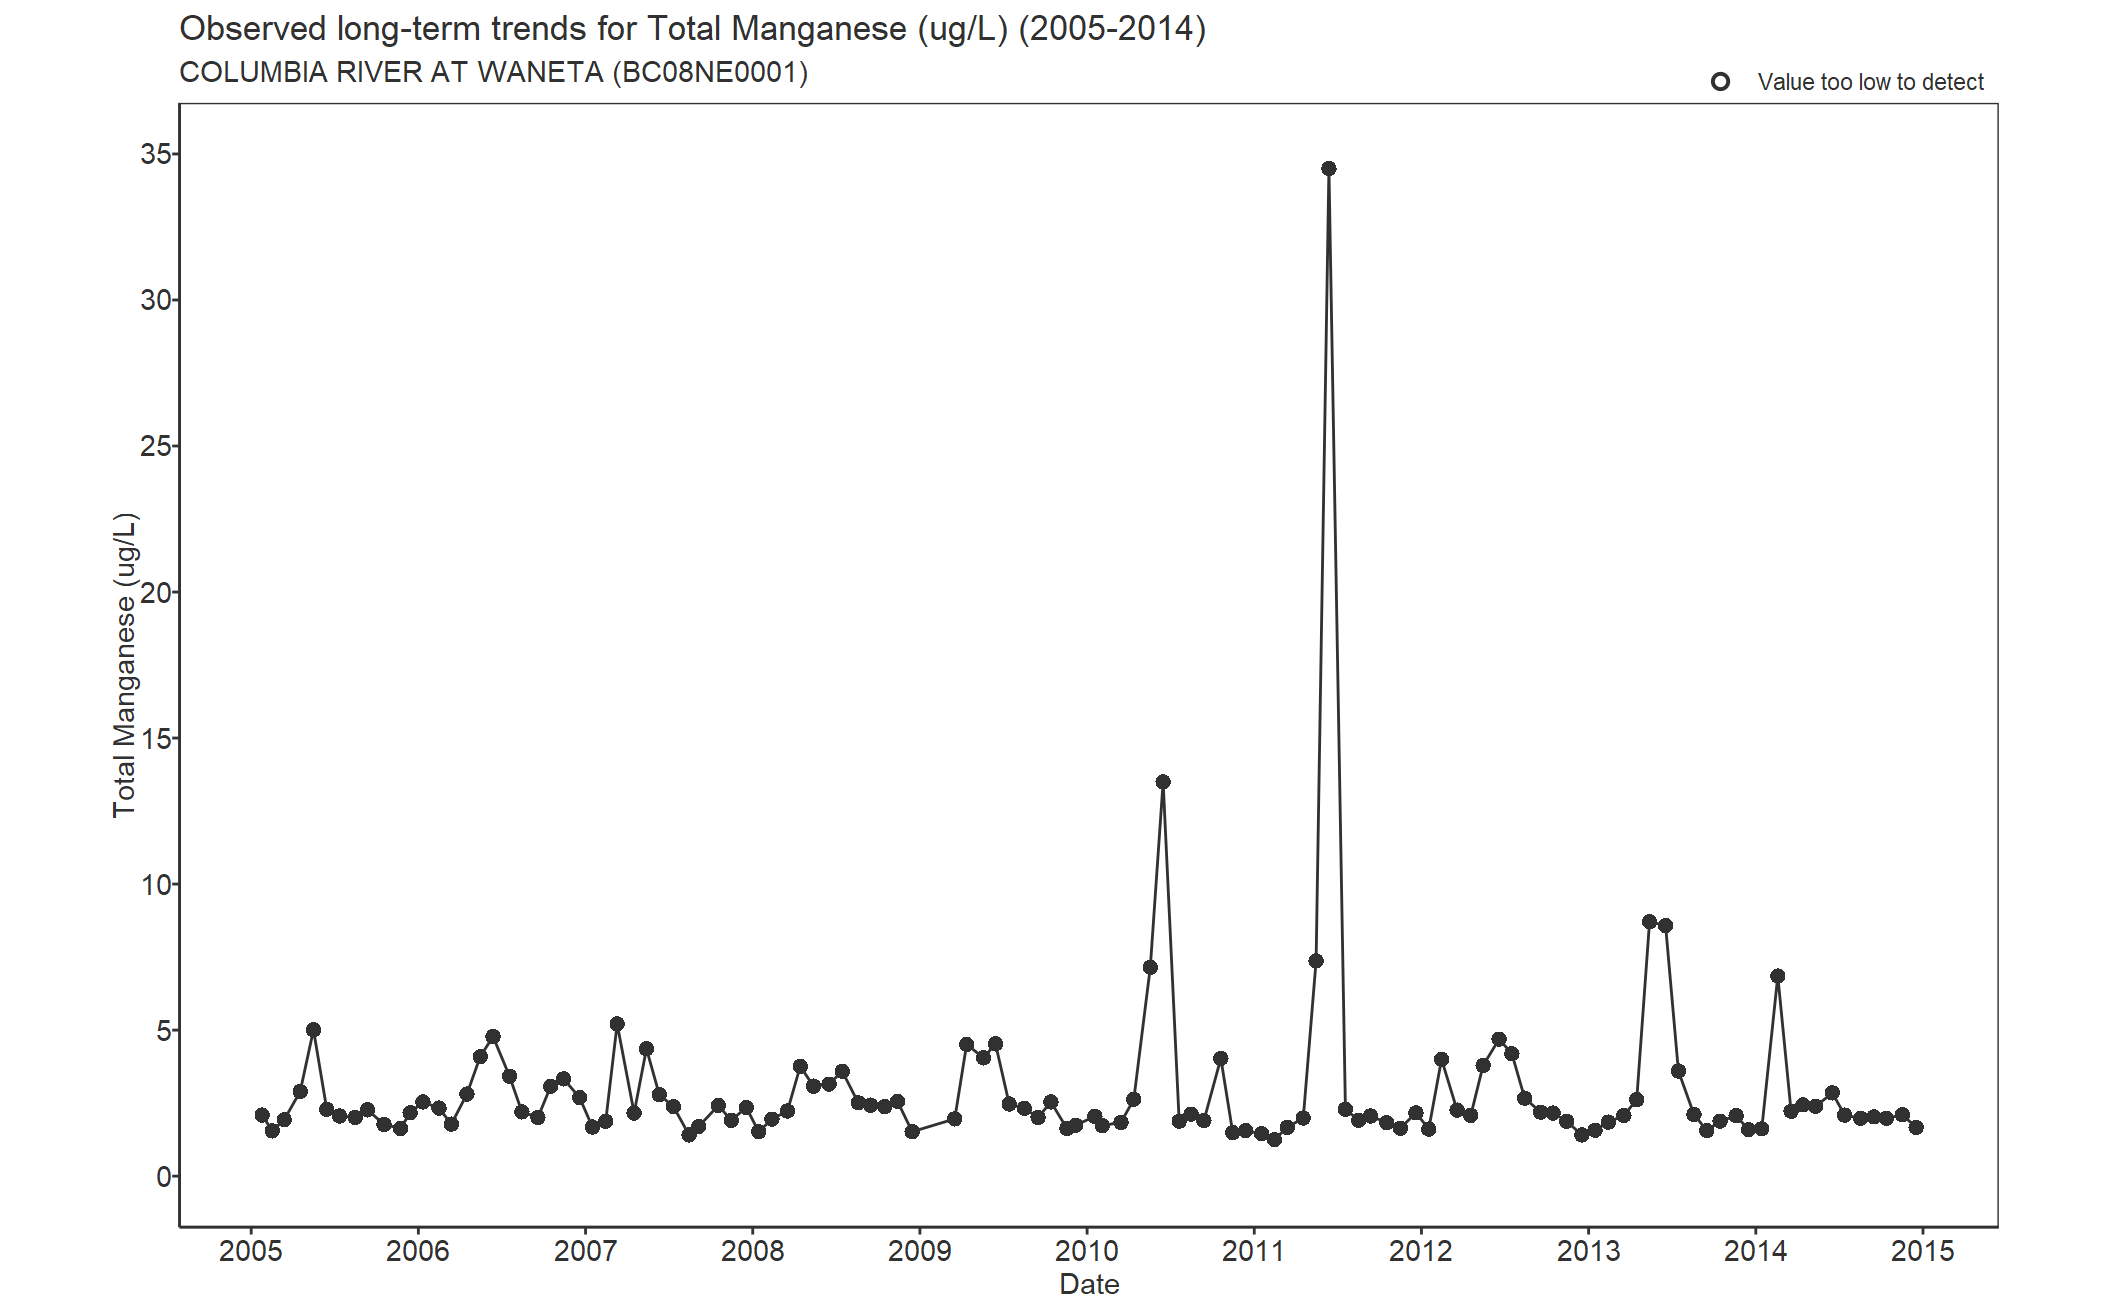 Observed long-term trends for Manganese Total (2005-2014)